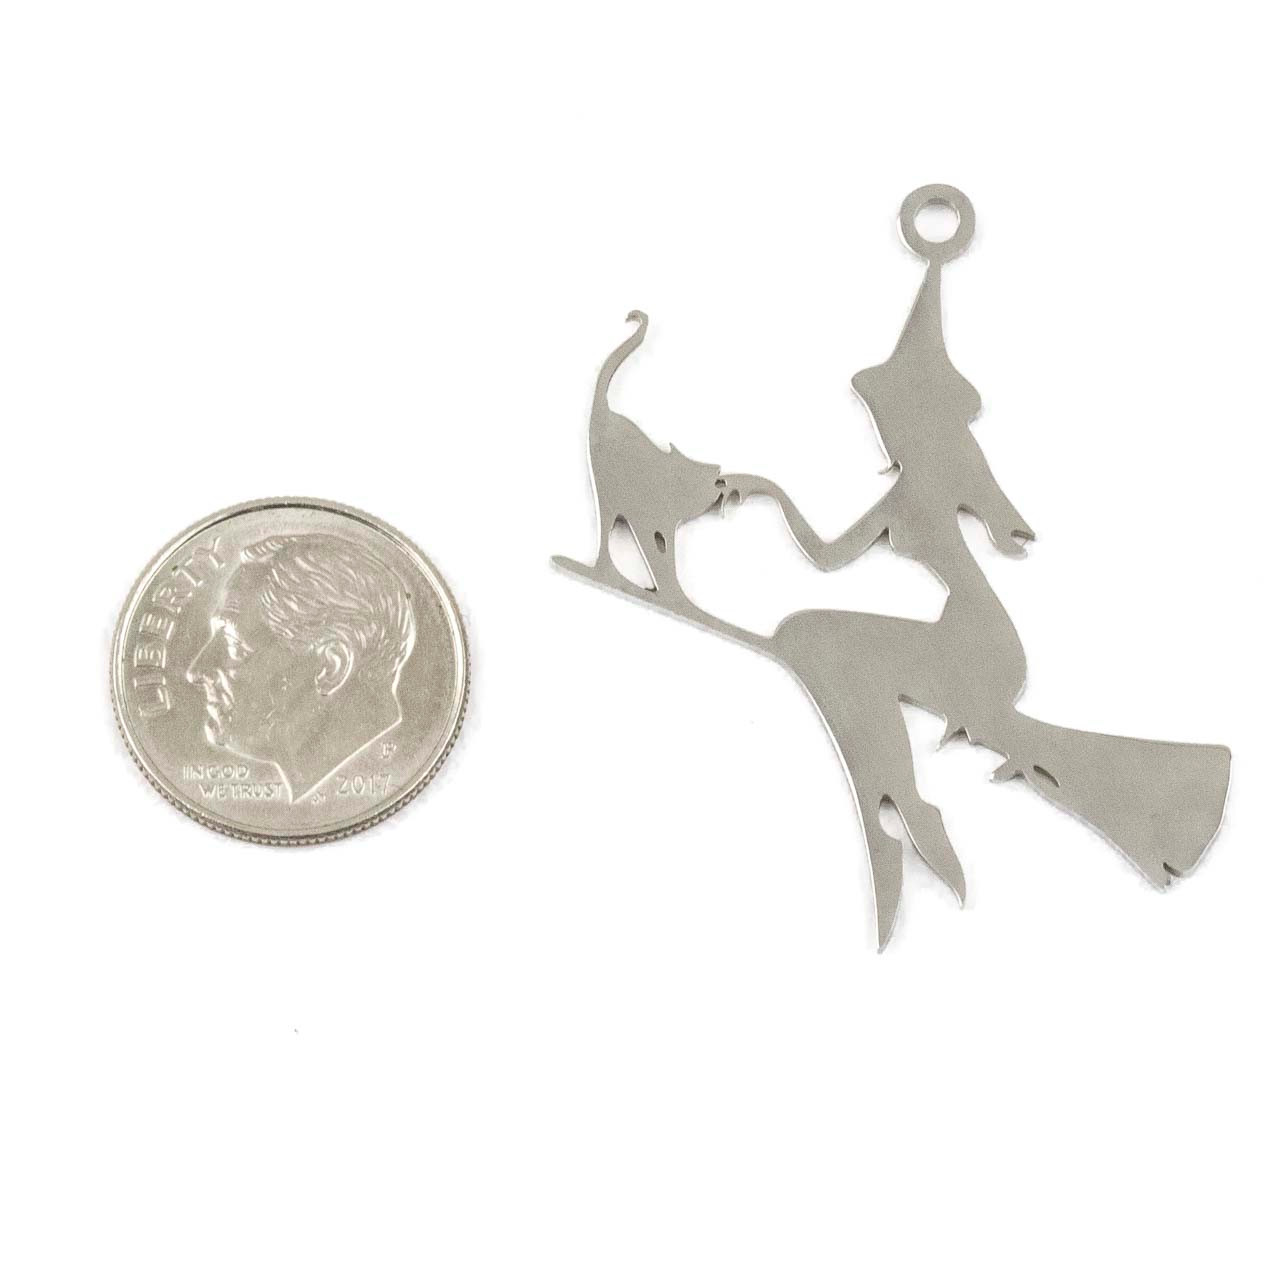 Silver Pewter (zinc-based alloy) 18x20mm Scaredy Cat Charms - 4